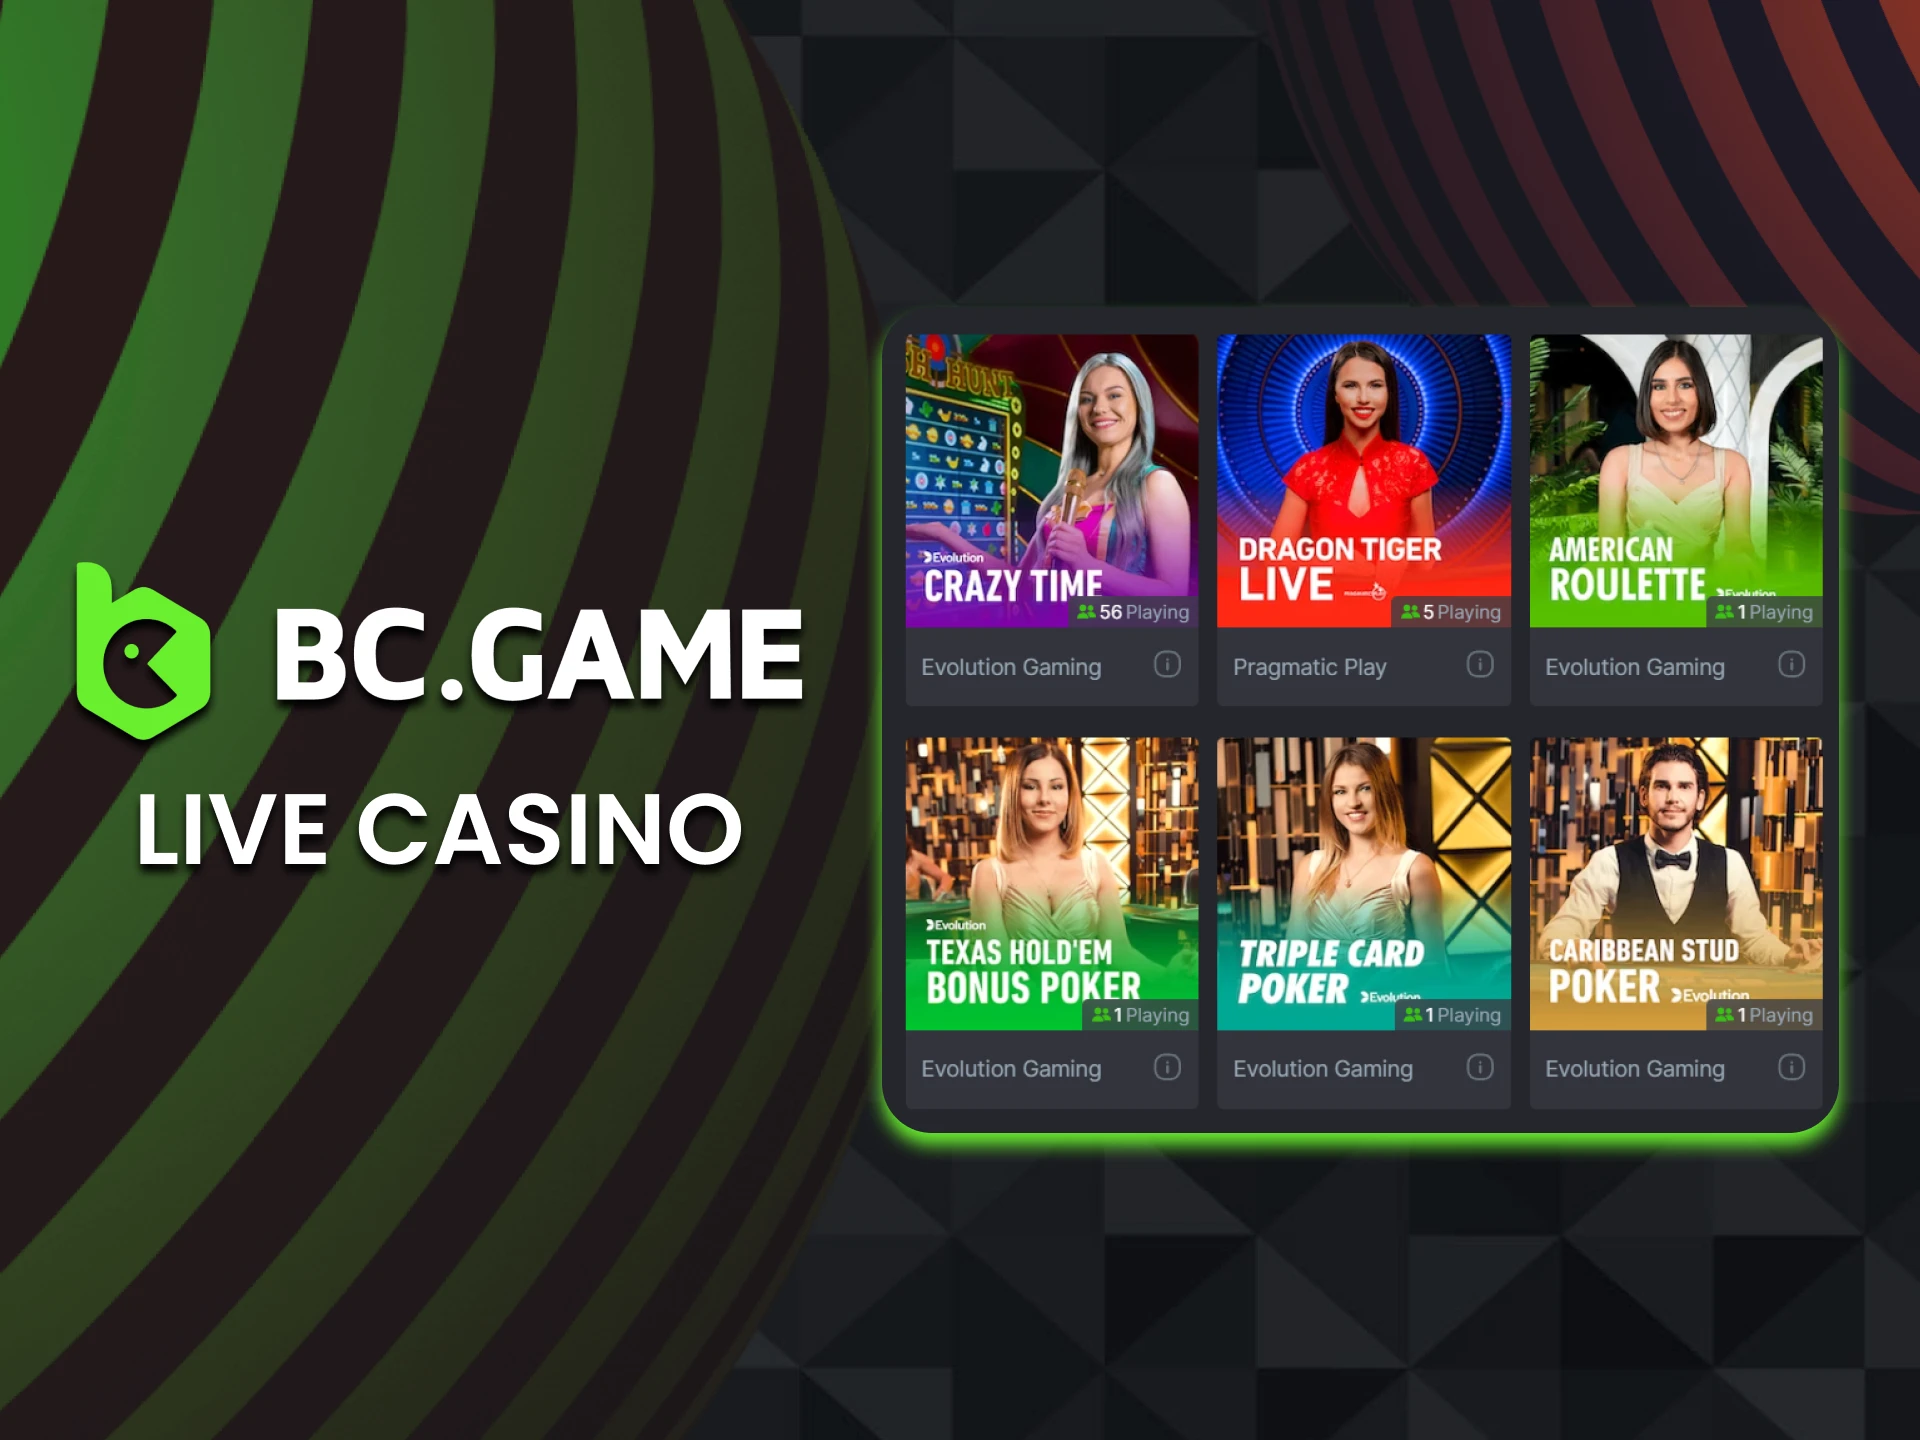 You can play at BC Game live casino with real dealers.